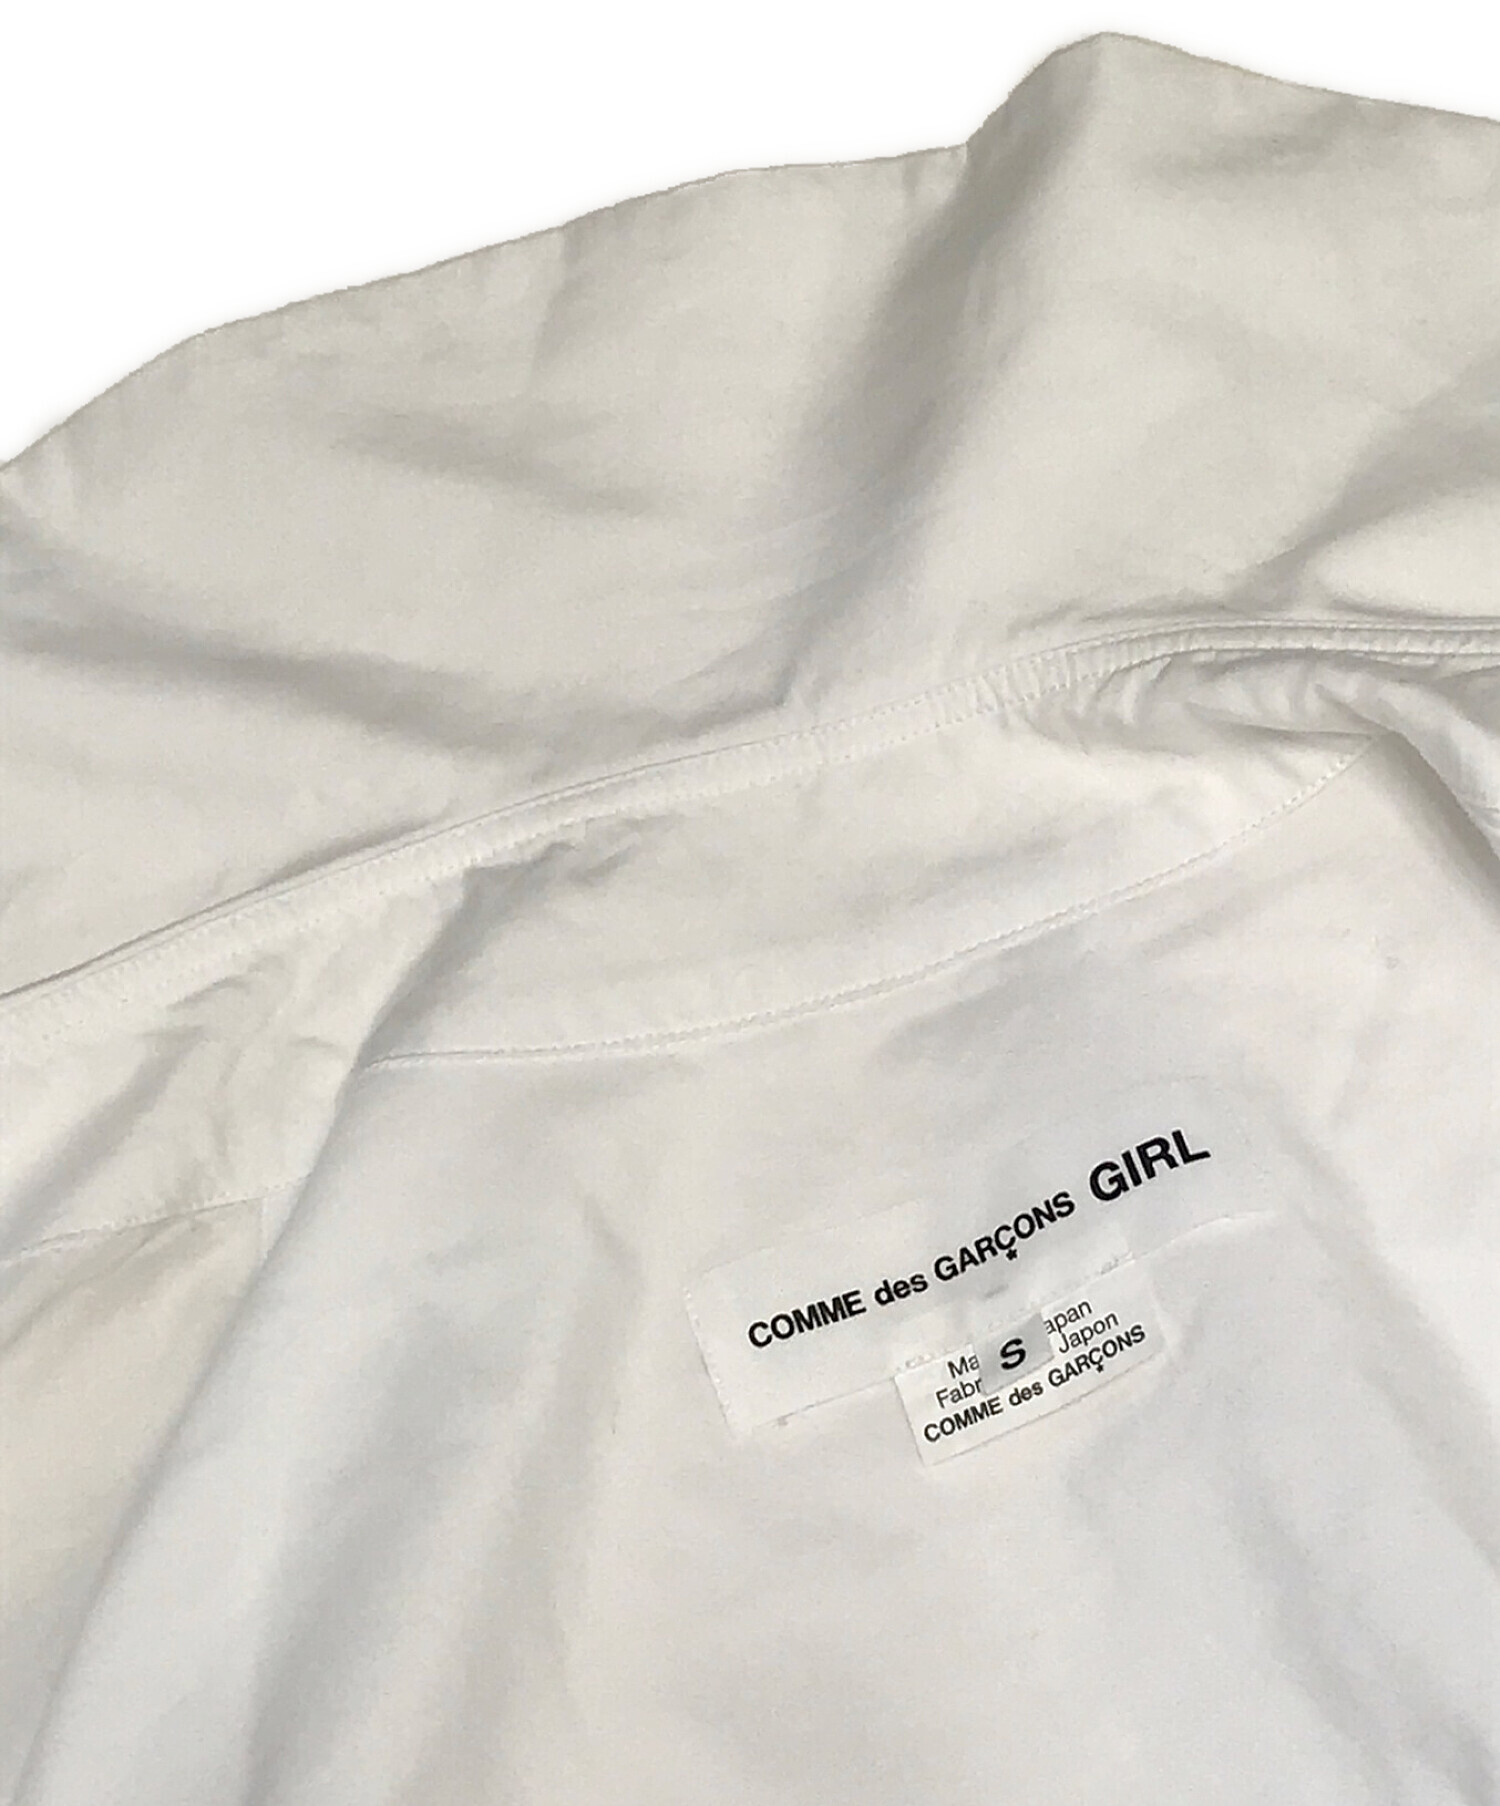 COMME des GARCONS GIRL 21SS バルーンスリーブブラウス